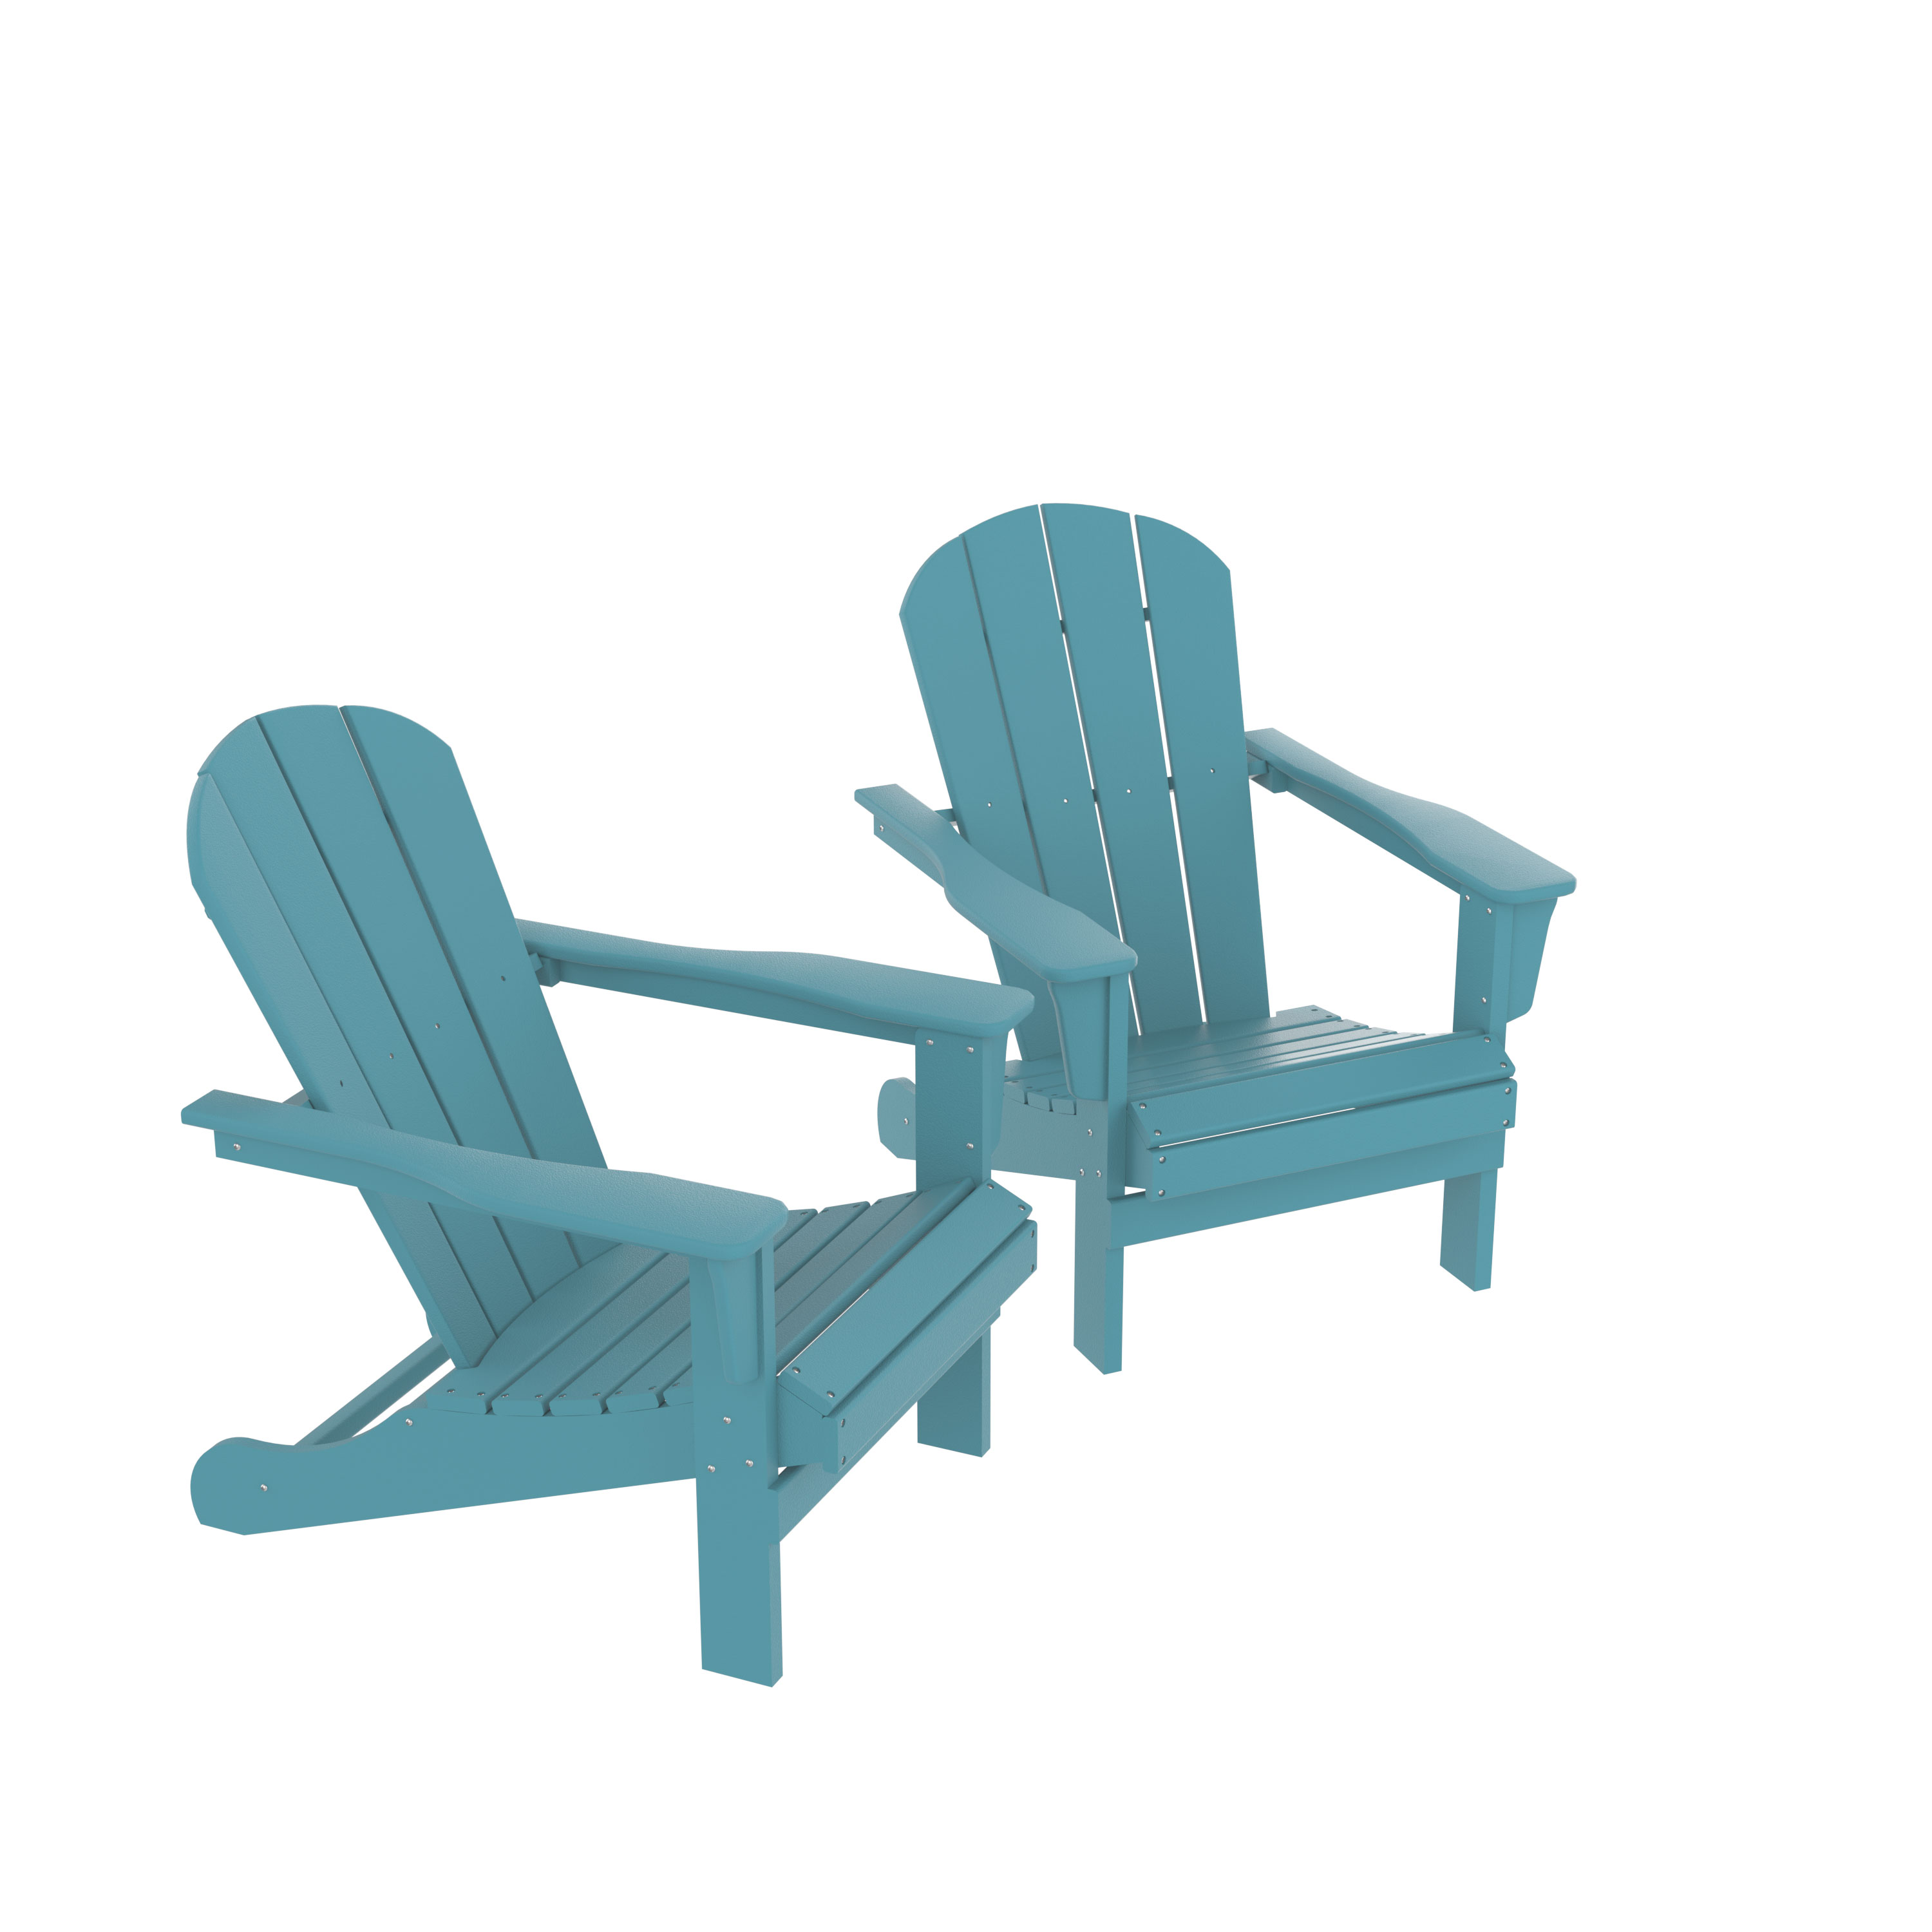 Adirondack Chair, Fire Pit Chairs, Sand Chair, Patio Outdoor Chairs, Dpe Plastic Resin Deck Chair, Lawn Chairs, Adult Size, Weather Resistant For Patio/ Backyard/Garden, Blue, Set Of 2 - image 5 of 6